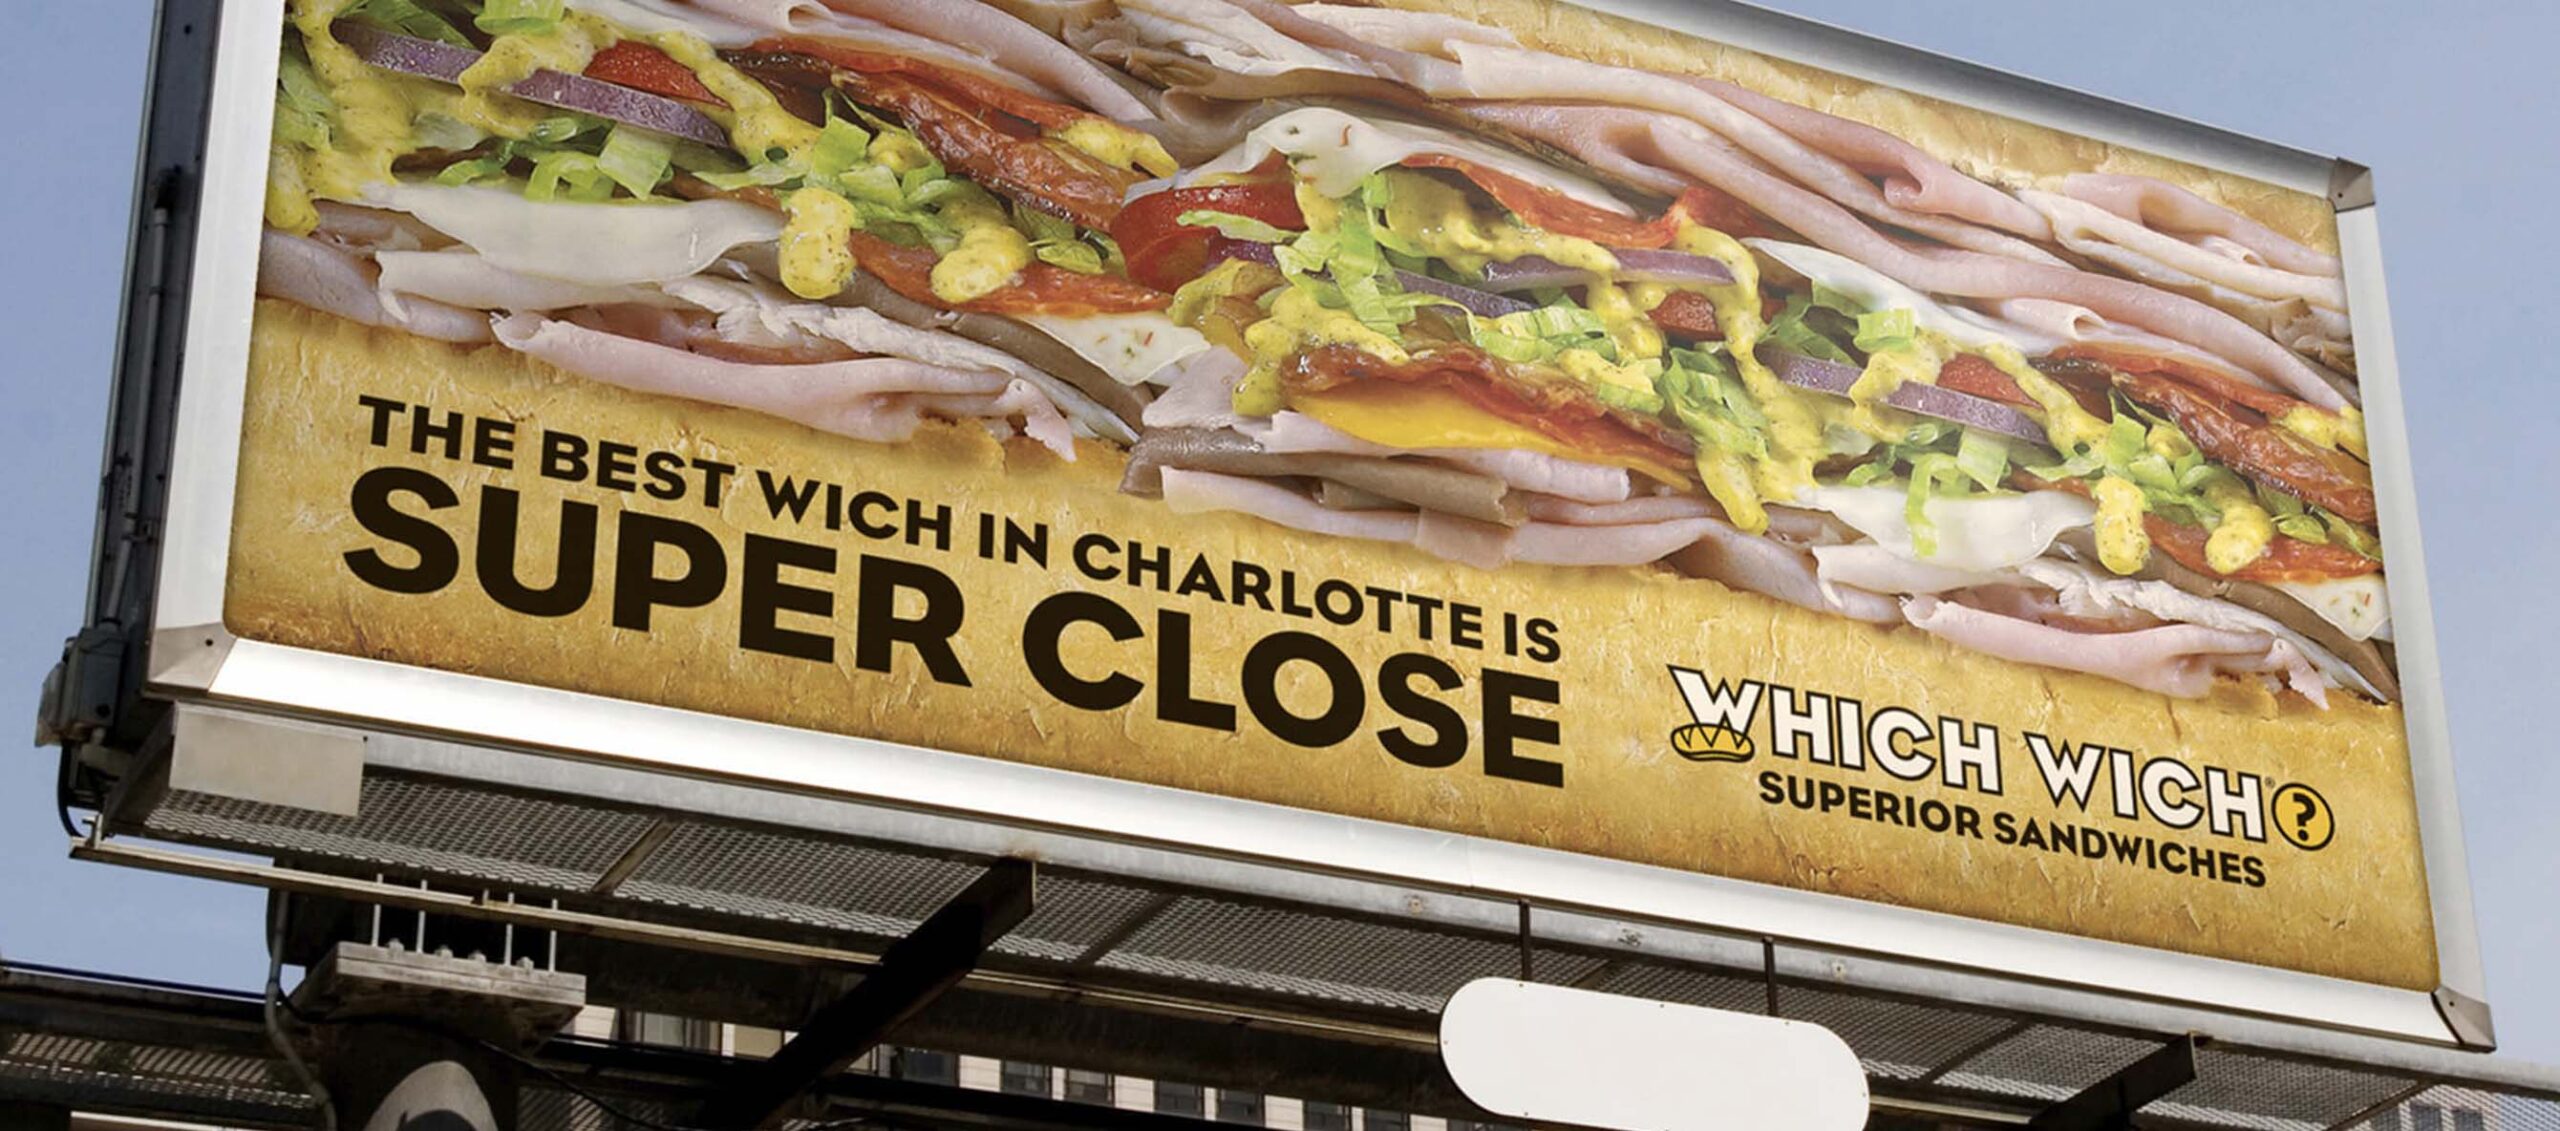 New Wich Ad Campaign Gives Charlotte a Really, Really Close Look at a Superior Sandwich - Common Good